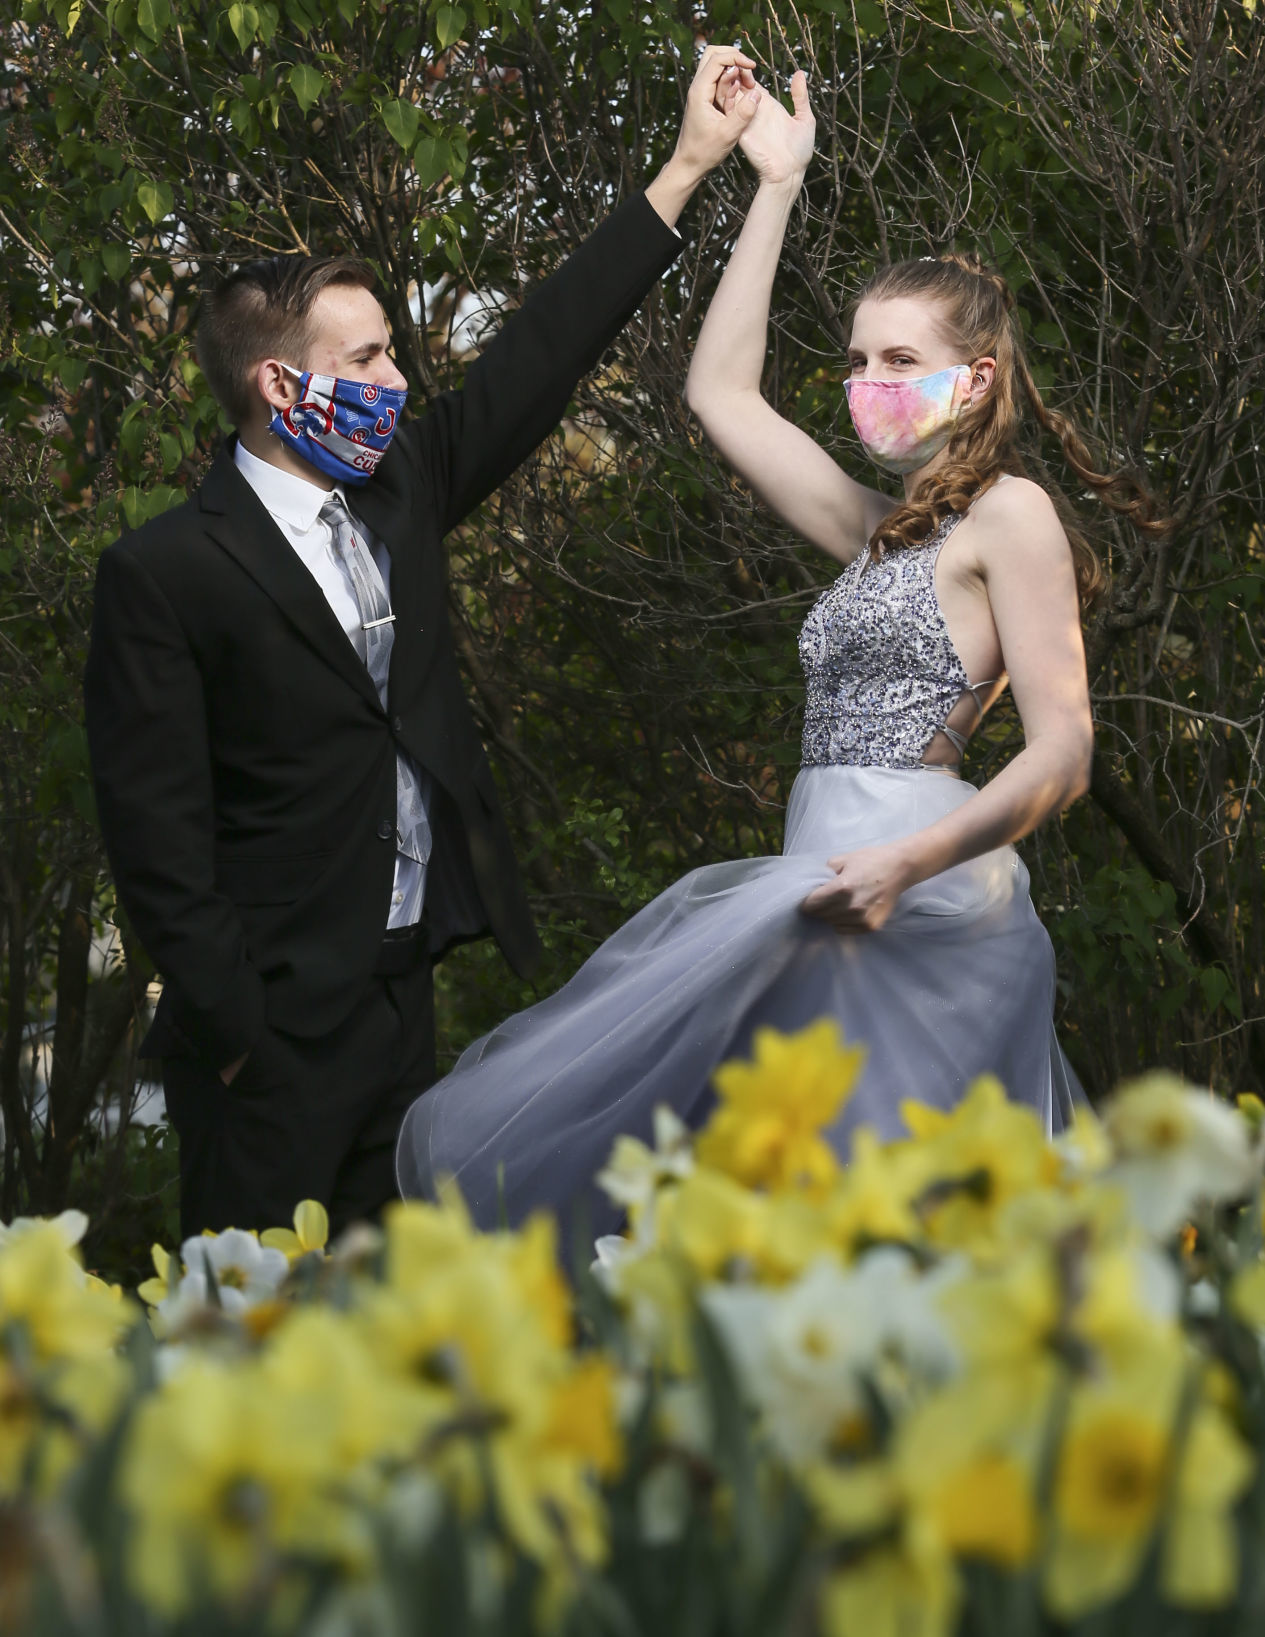 Gallery | melissabraxley | Prom poses, Prom pictures couples, Prom picture  poses